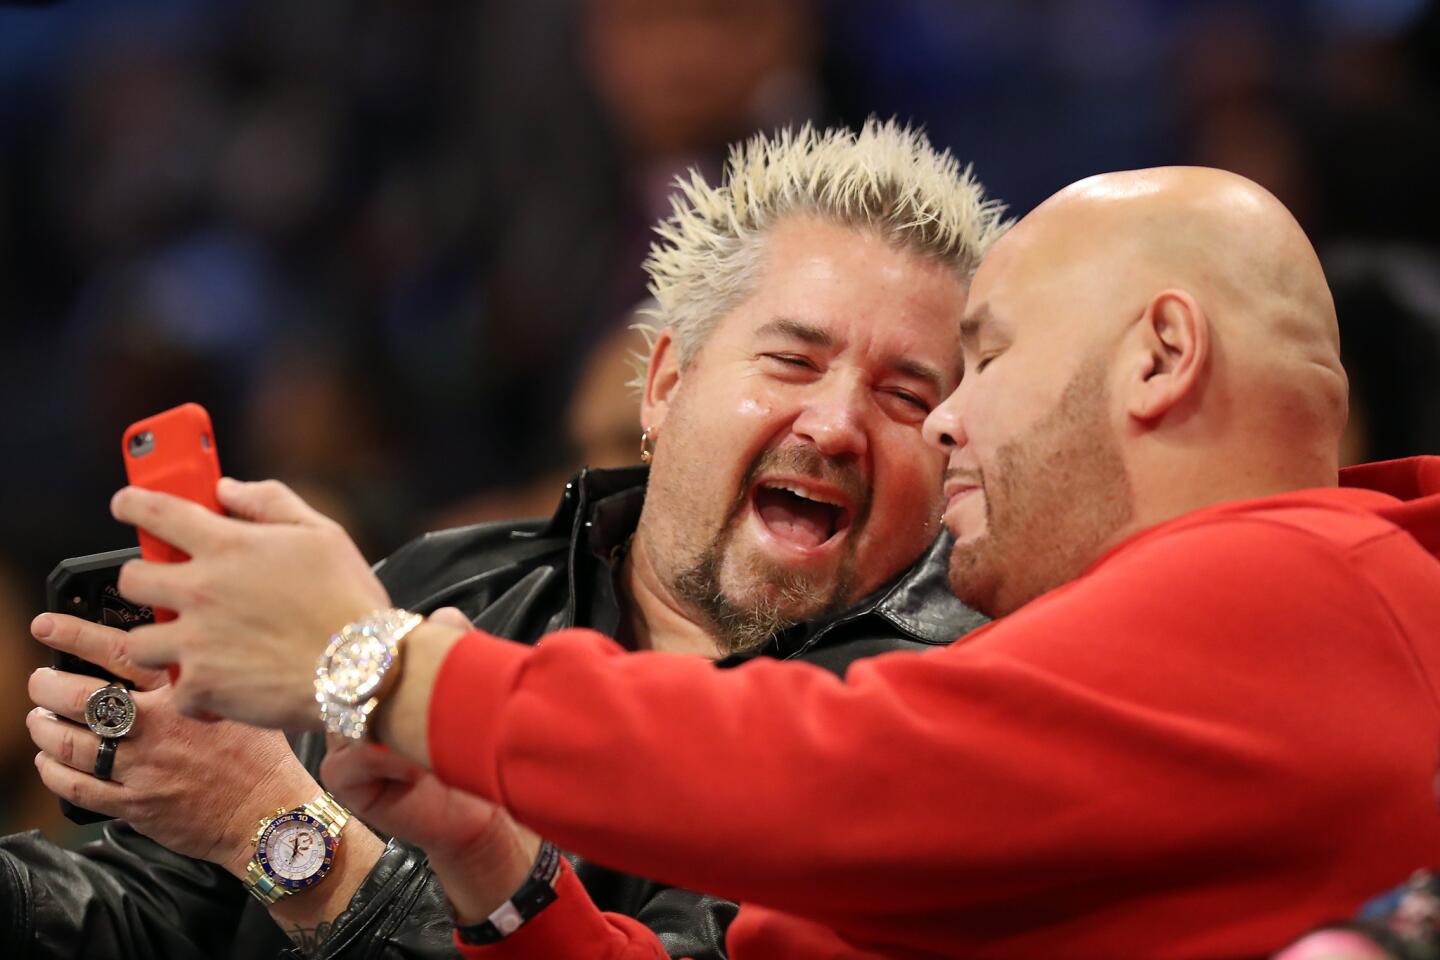 TV personality Guy Fierii and rapper Fat Joe share a laugh during the skills competition.